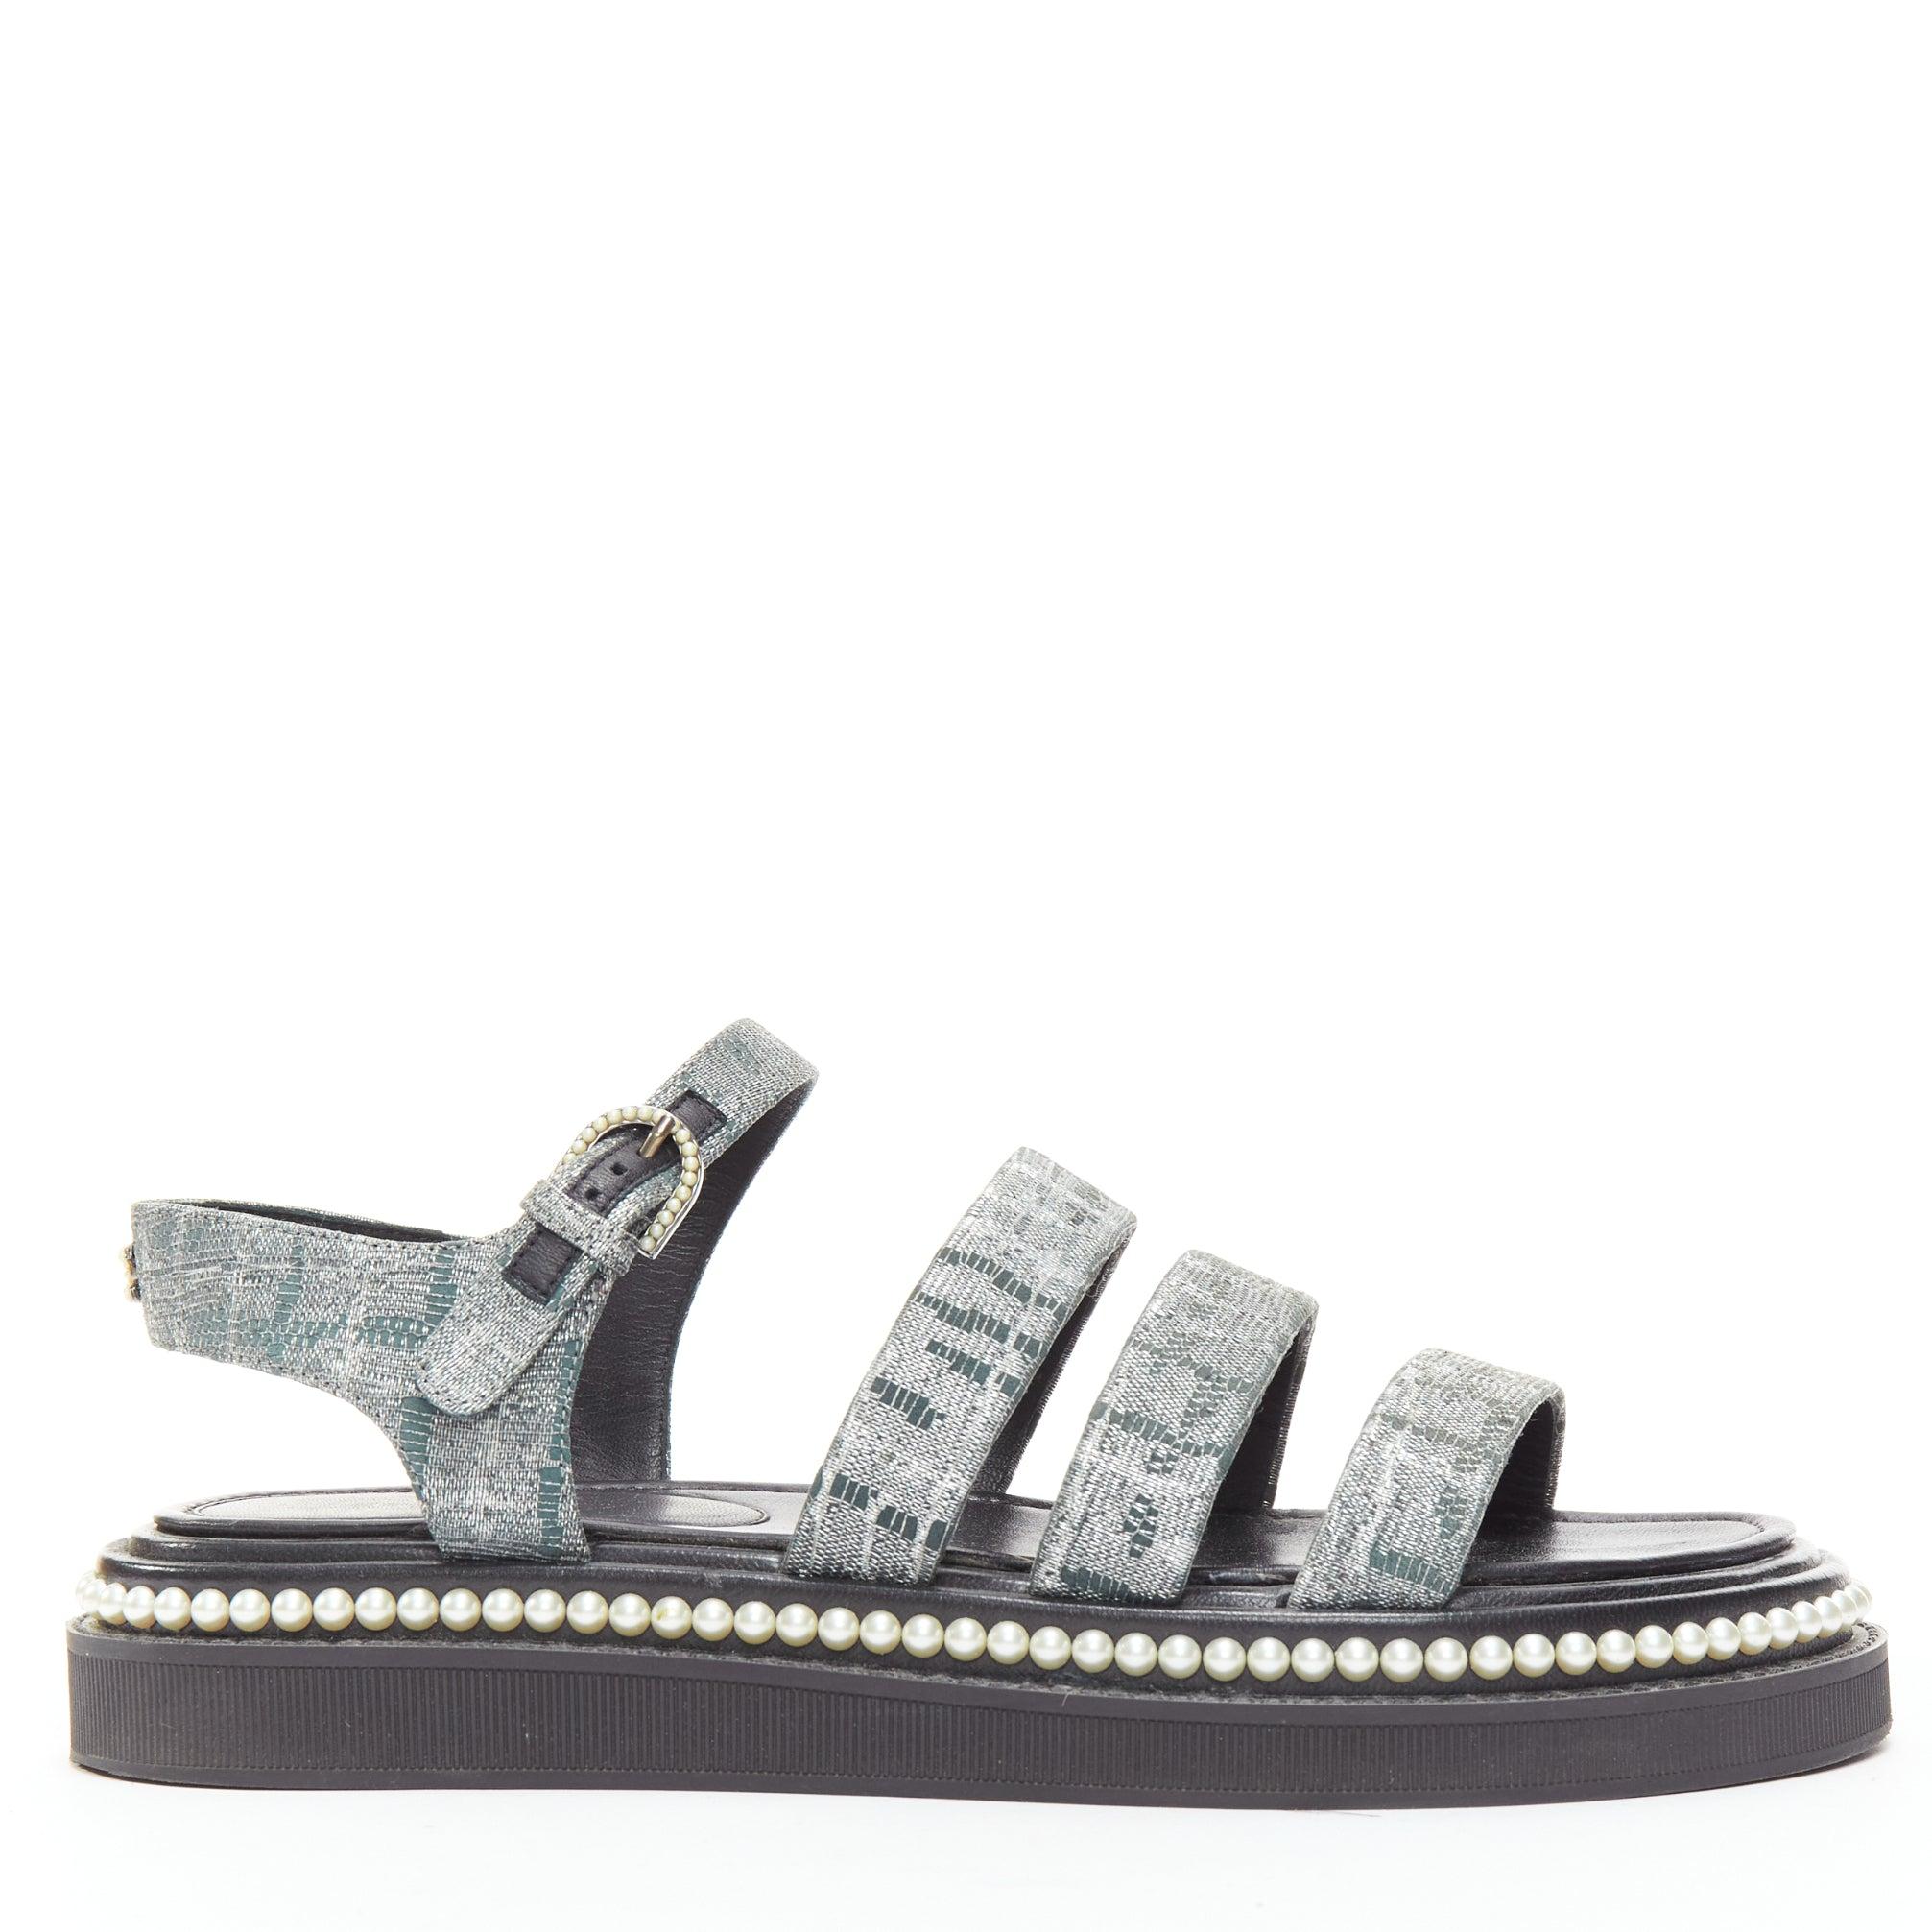 CHANEL metallic grey metallic jacquard pearl embellished dad sandals EU38
Reference: TGAS/D00981
Brand: Chanel
Model: Dad Sandal
Material: Fabric
Color: Grey, Black
Pattern: Solid
Closure: Ankle Strap
Lining: Black Leather
Extra Details: CHANEL